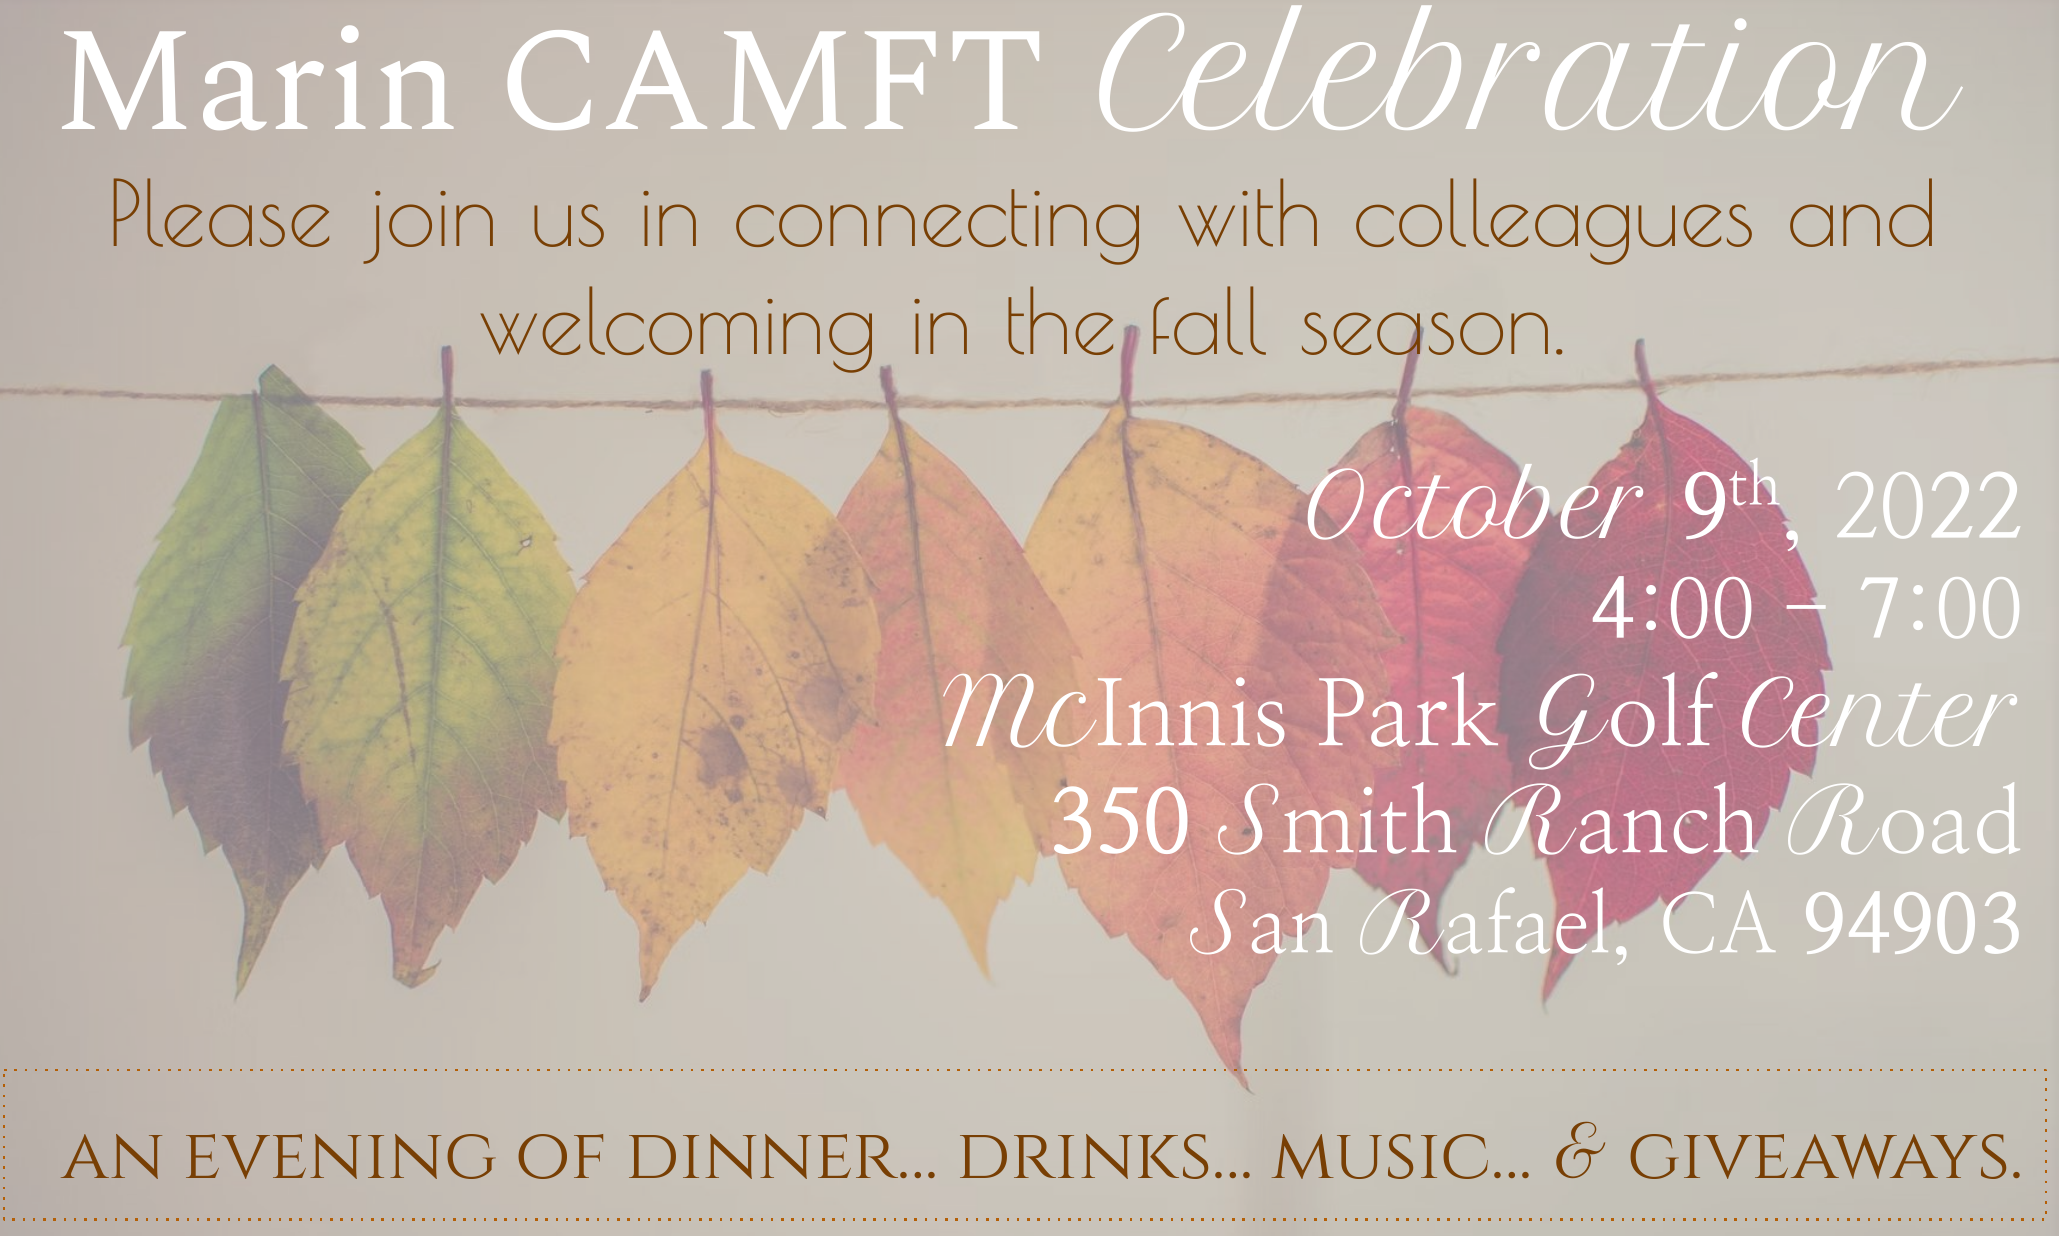 Save the date! Marin CAMFT Fall Celebration - October 9th - McInnis Park Golf Course